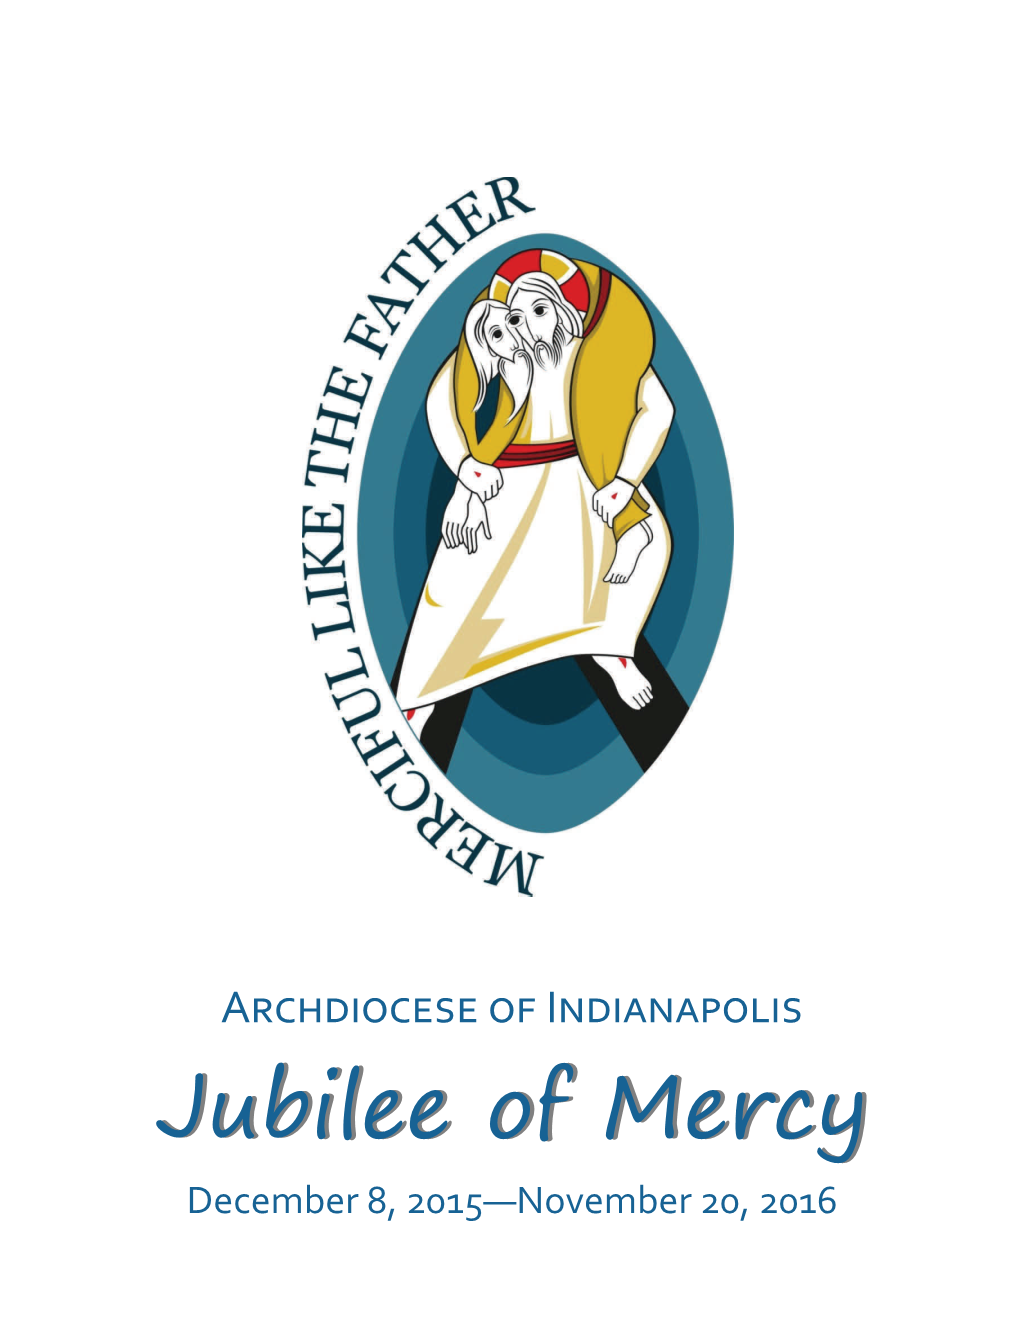 ARCHDIOCESE of INDIANAPOLIS Jubileejubilee Ofof Mercymercy December 8, 2015—November 20, 2016